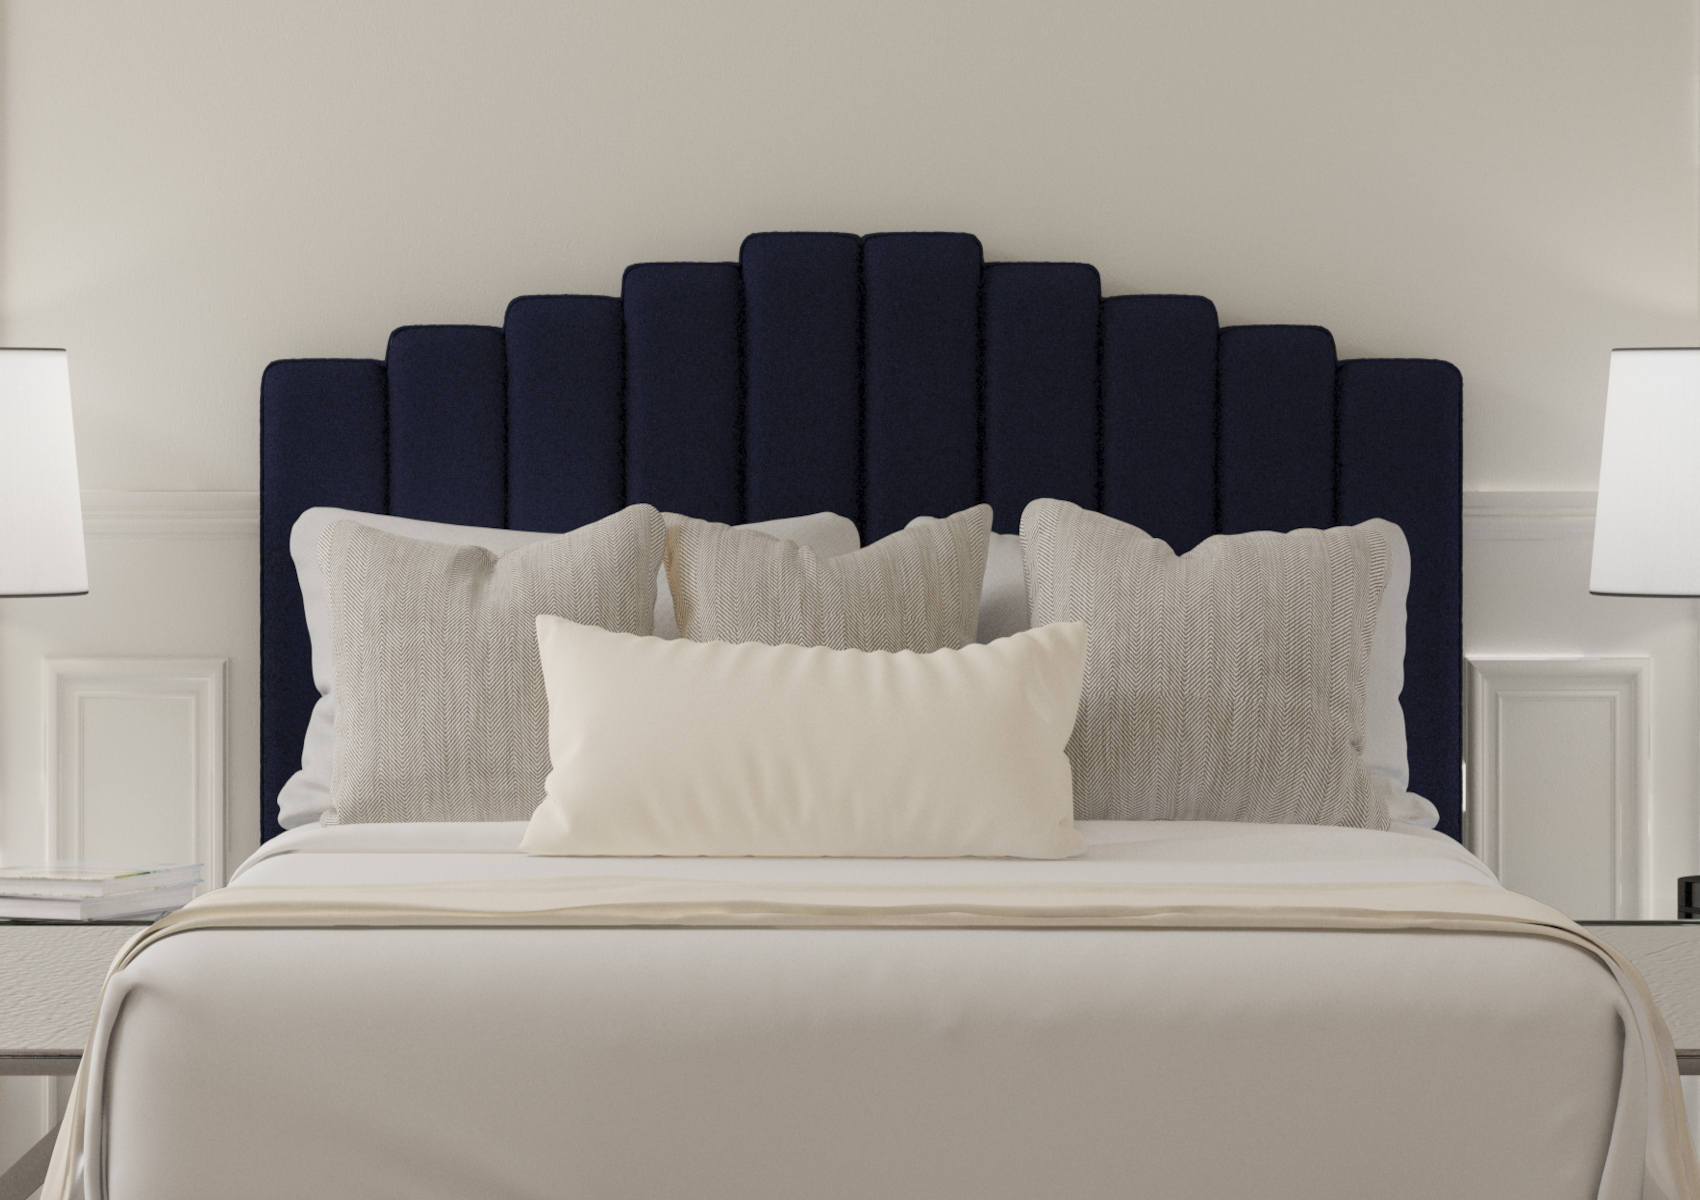 View Quinn Strutted Upholstered Headboard Time4Sleep information